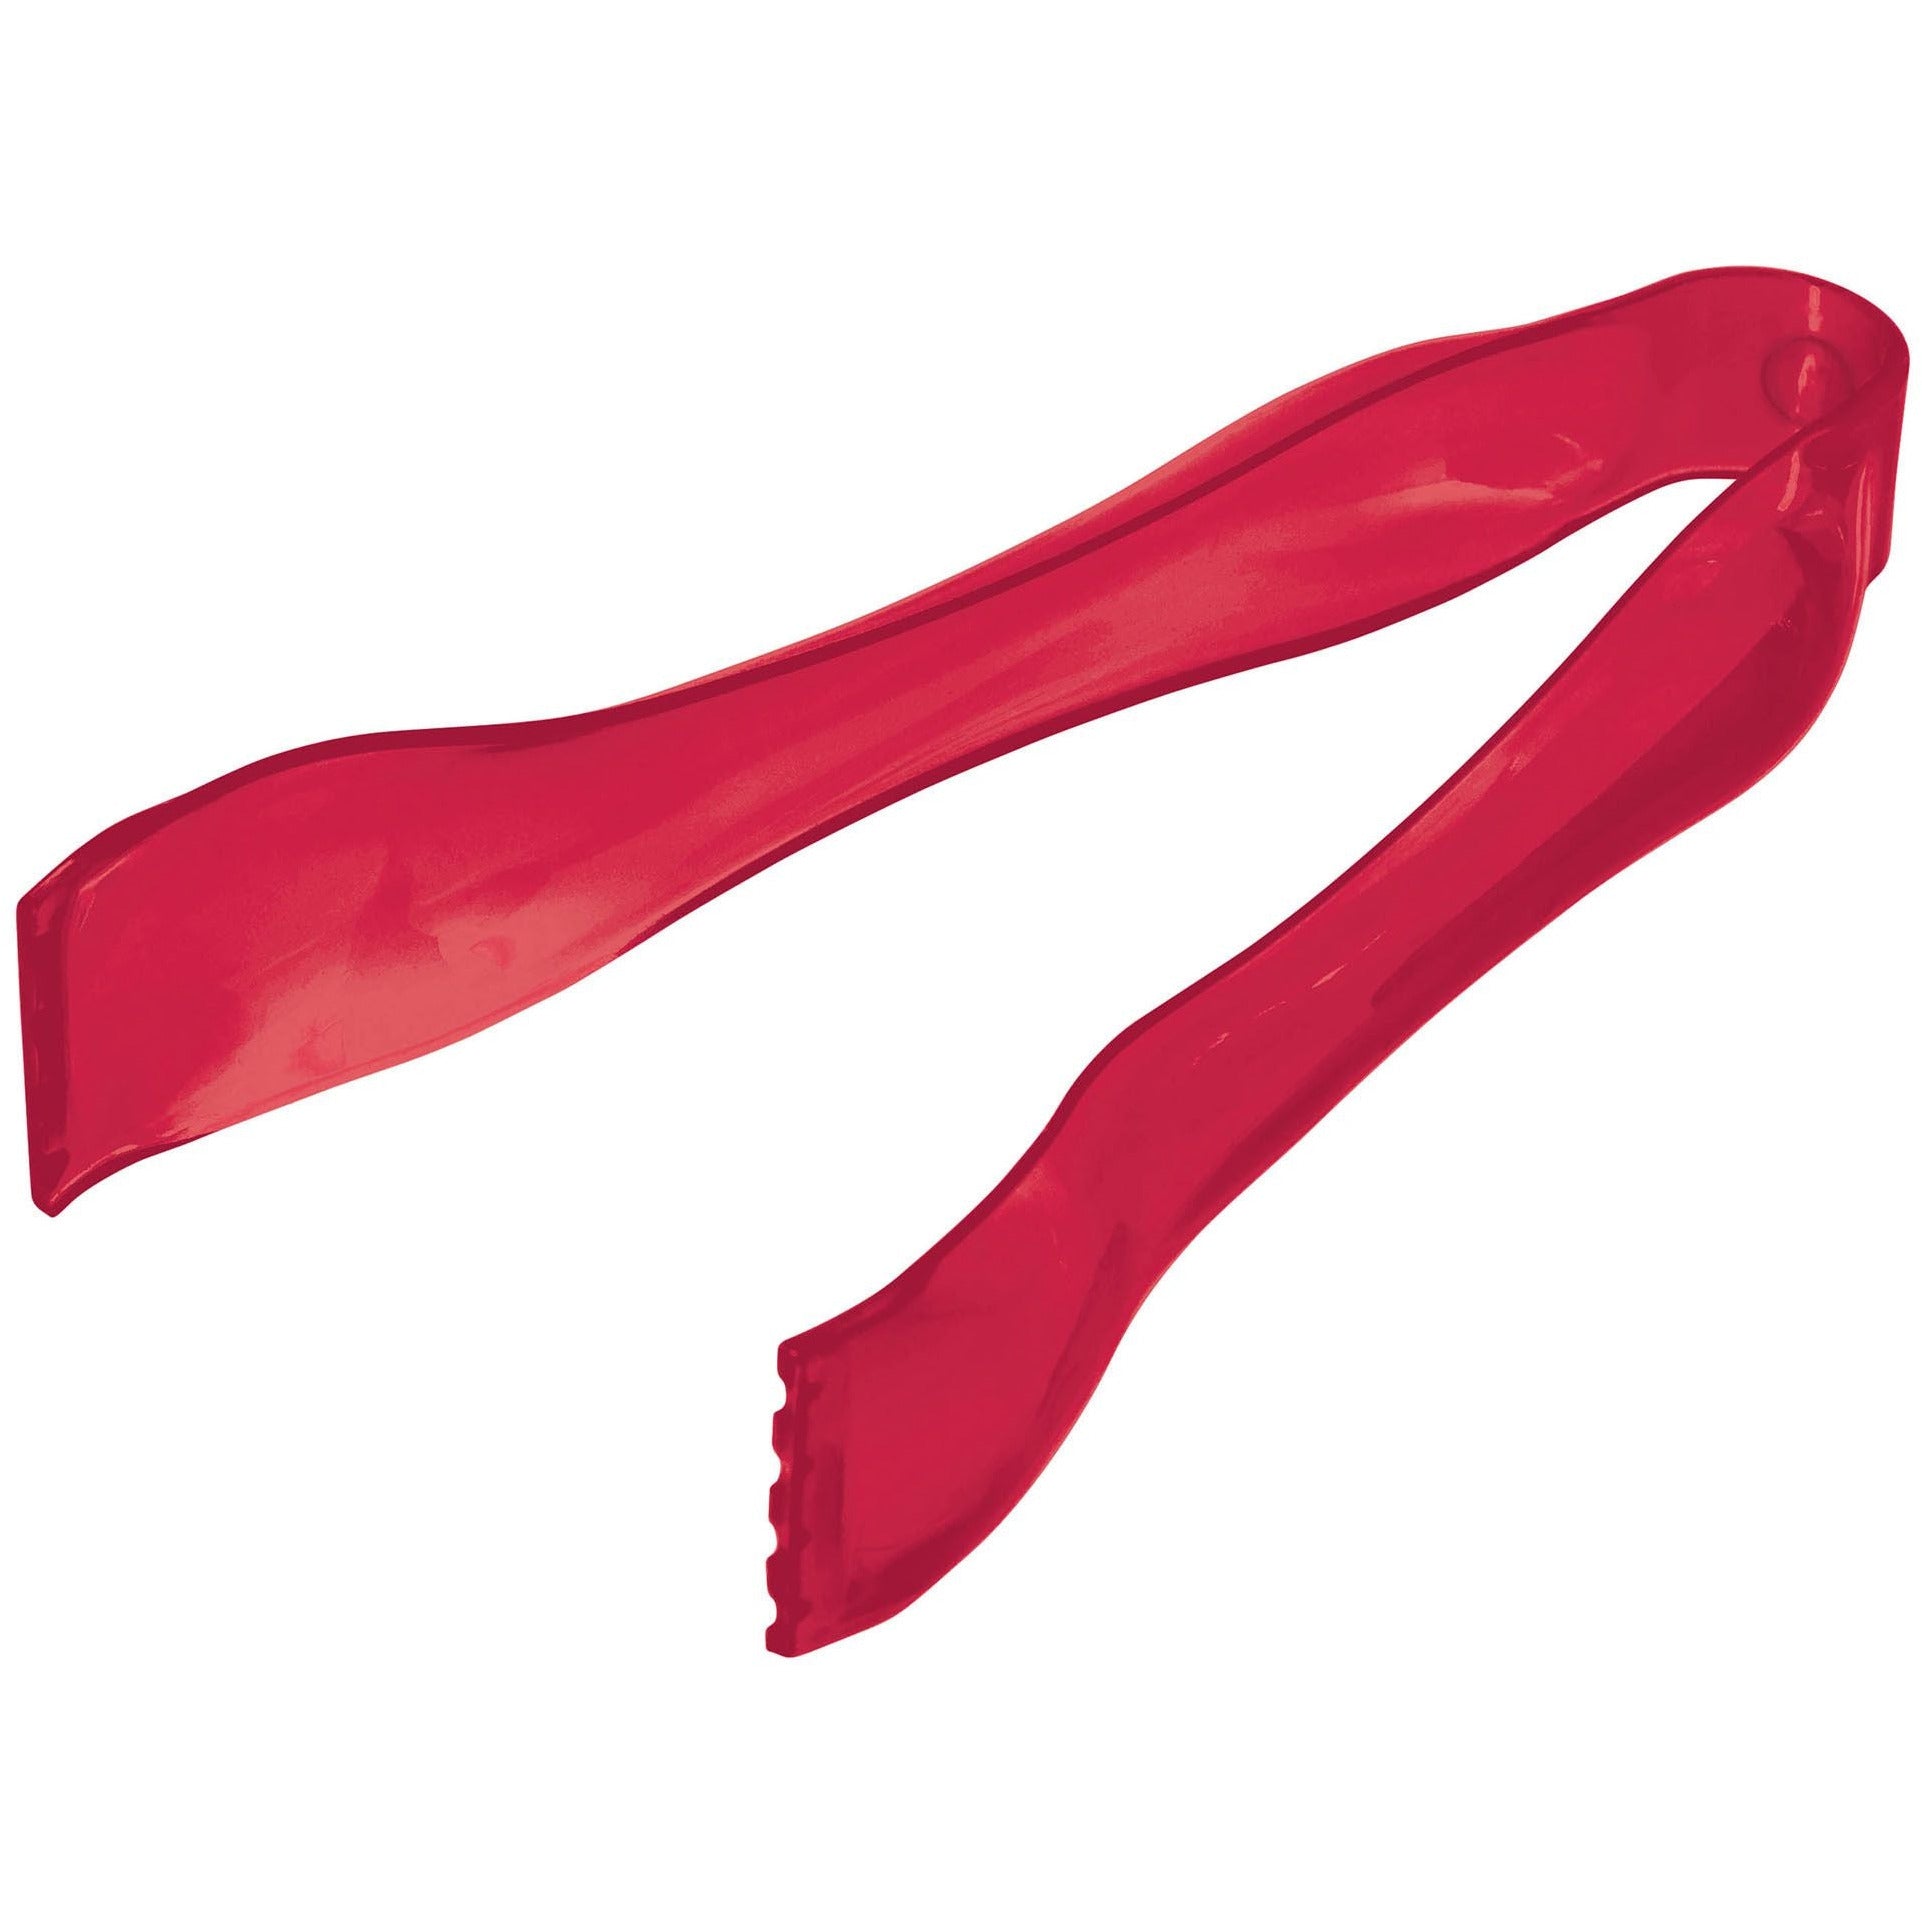 Amscan CONCESSIONS Red Mini Tongs